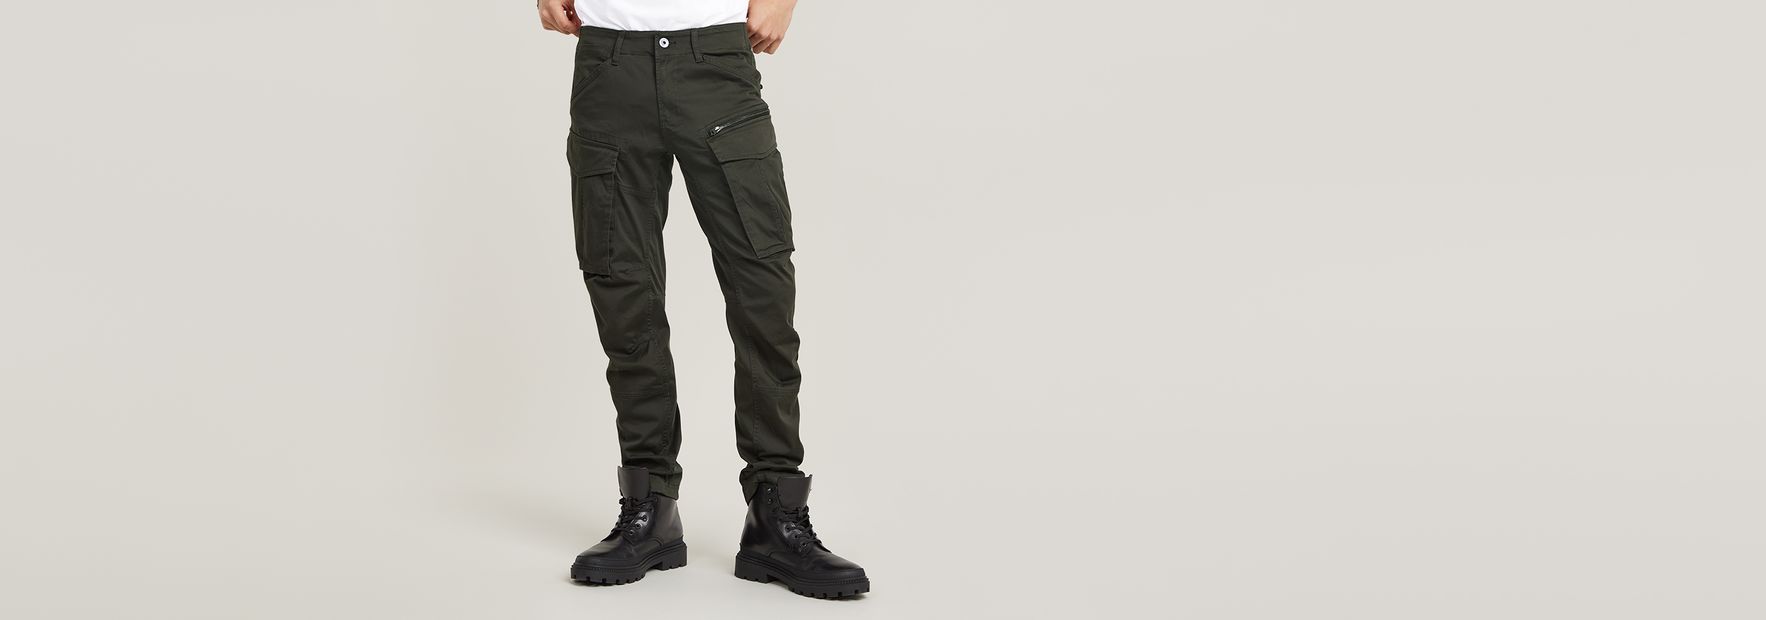 GStar Rovic Zip 3D straight tapered fit pants in khaki  ASOS